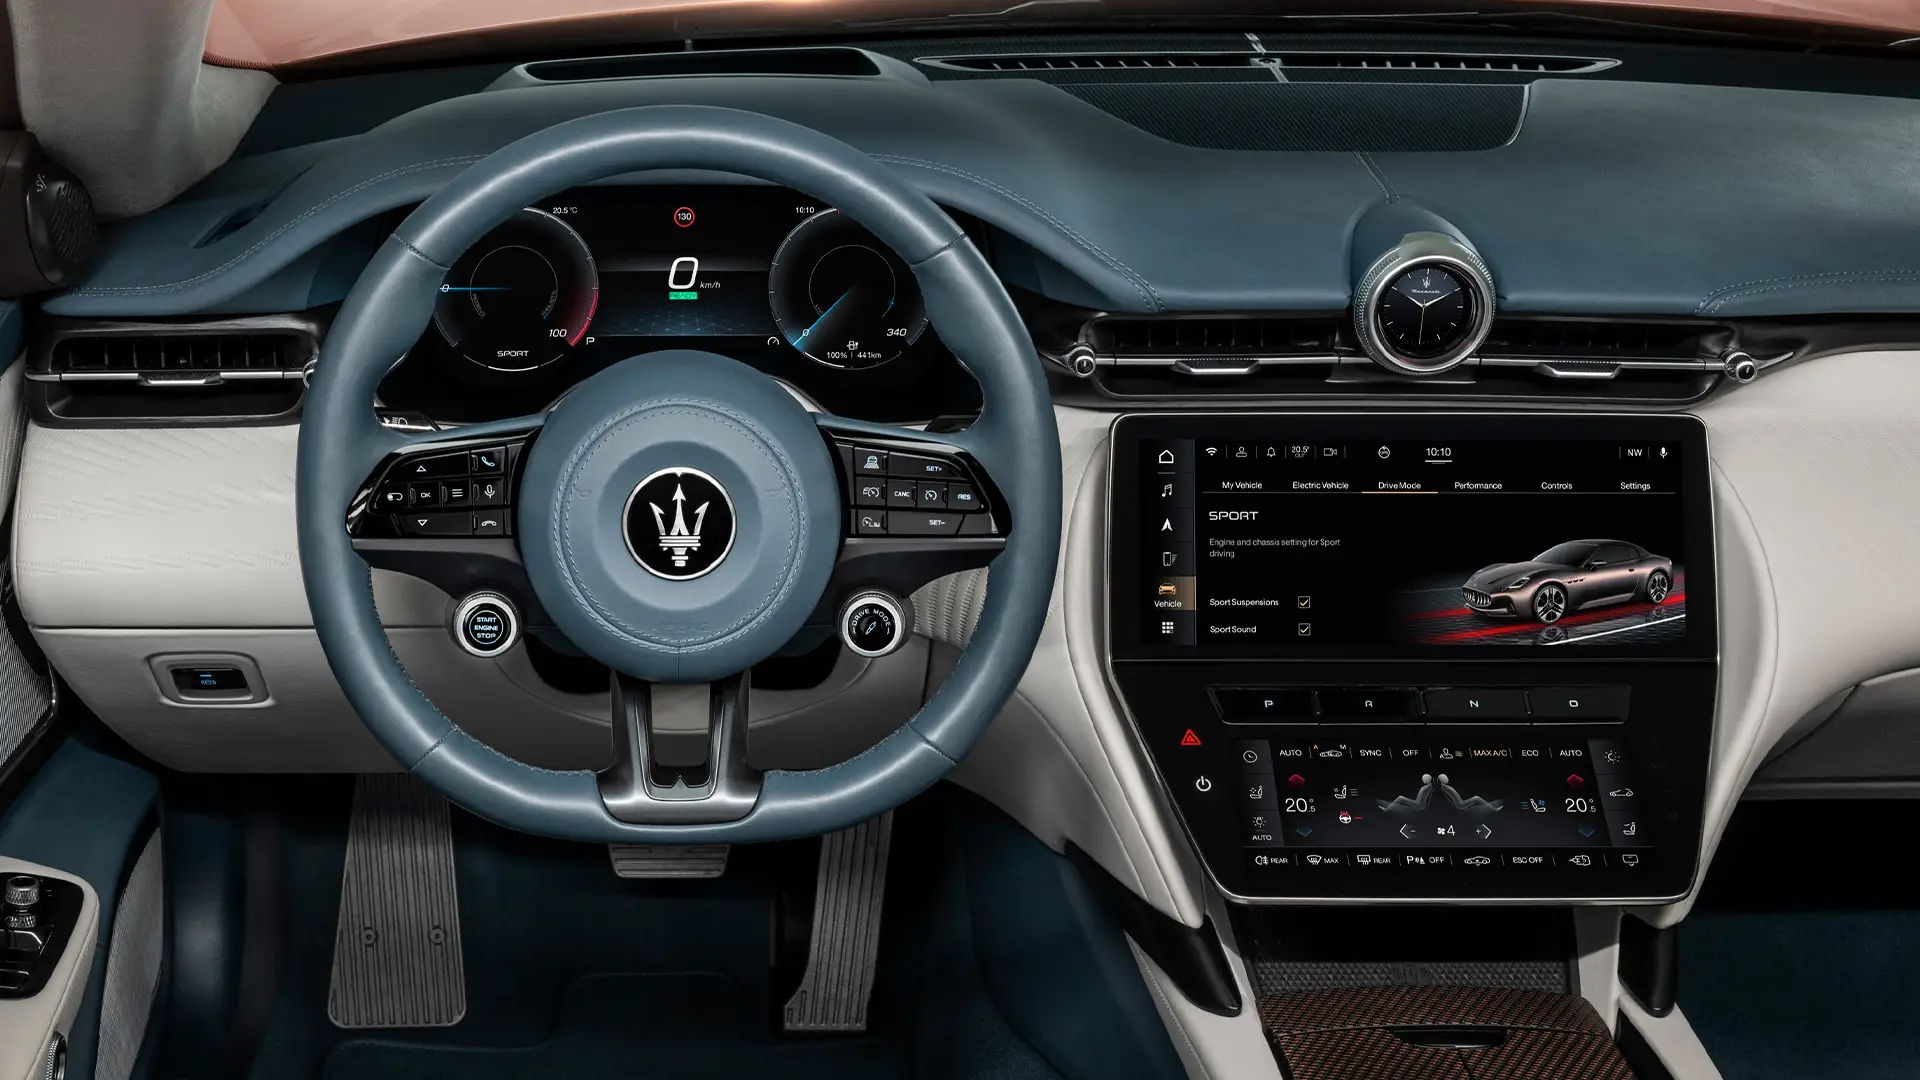 Head of Design at Maserati: Without screens, new cars would look like "an old 747" inside